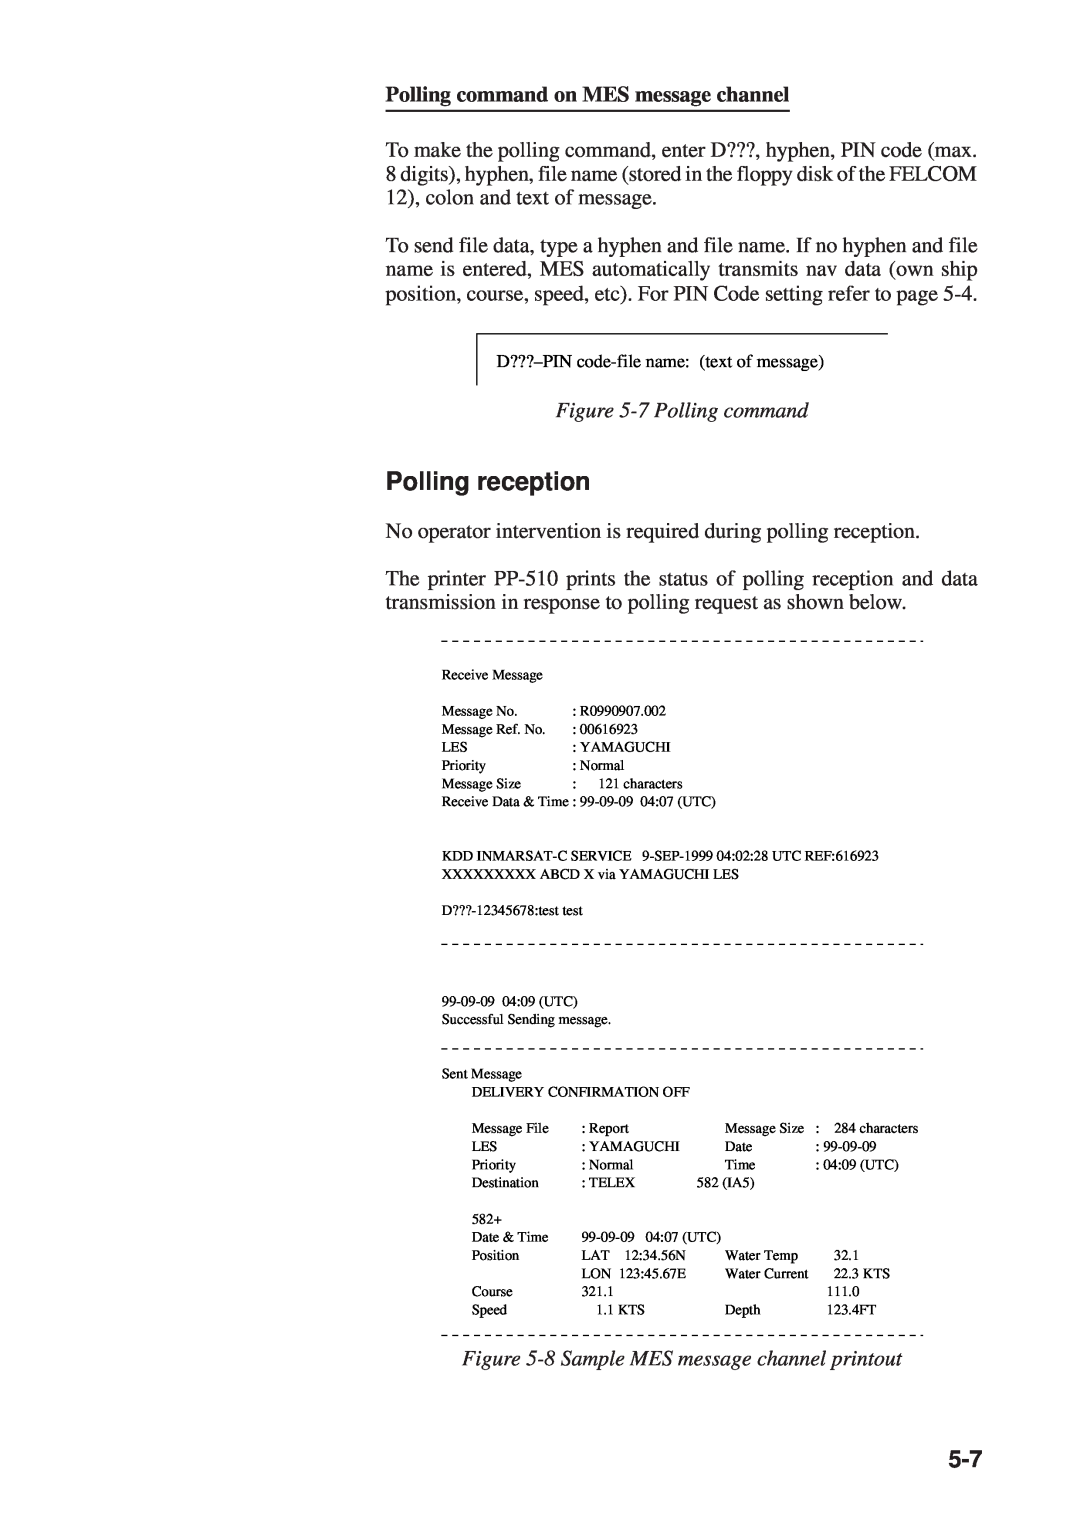 Furuno RC-1500-1T manual Polling reception, Polling command on MES message channel, 7 Polling command 